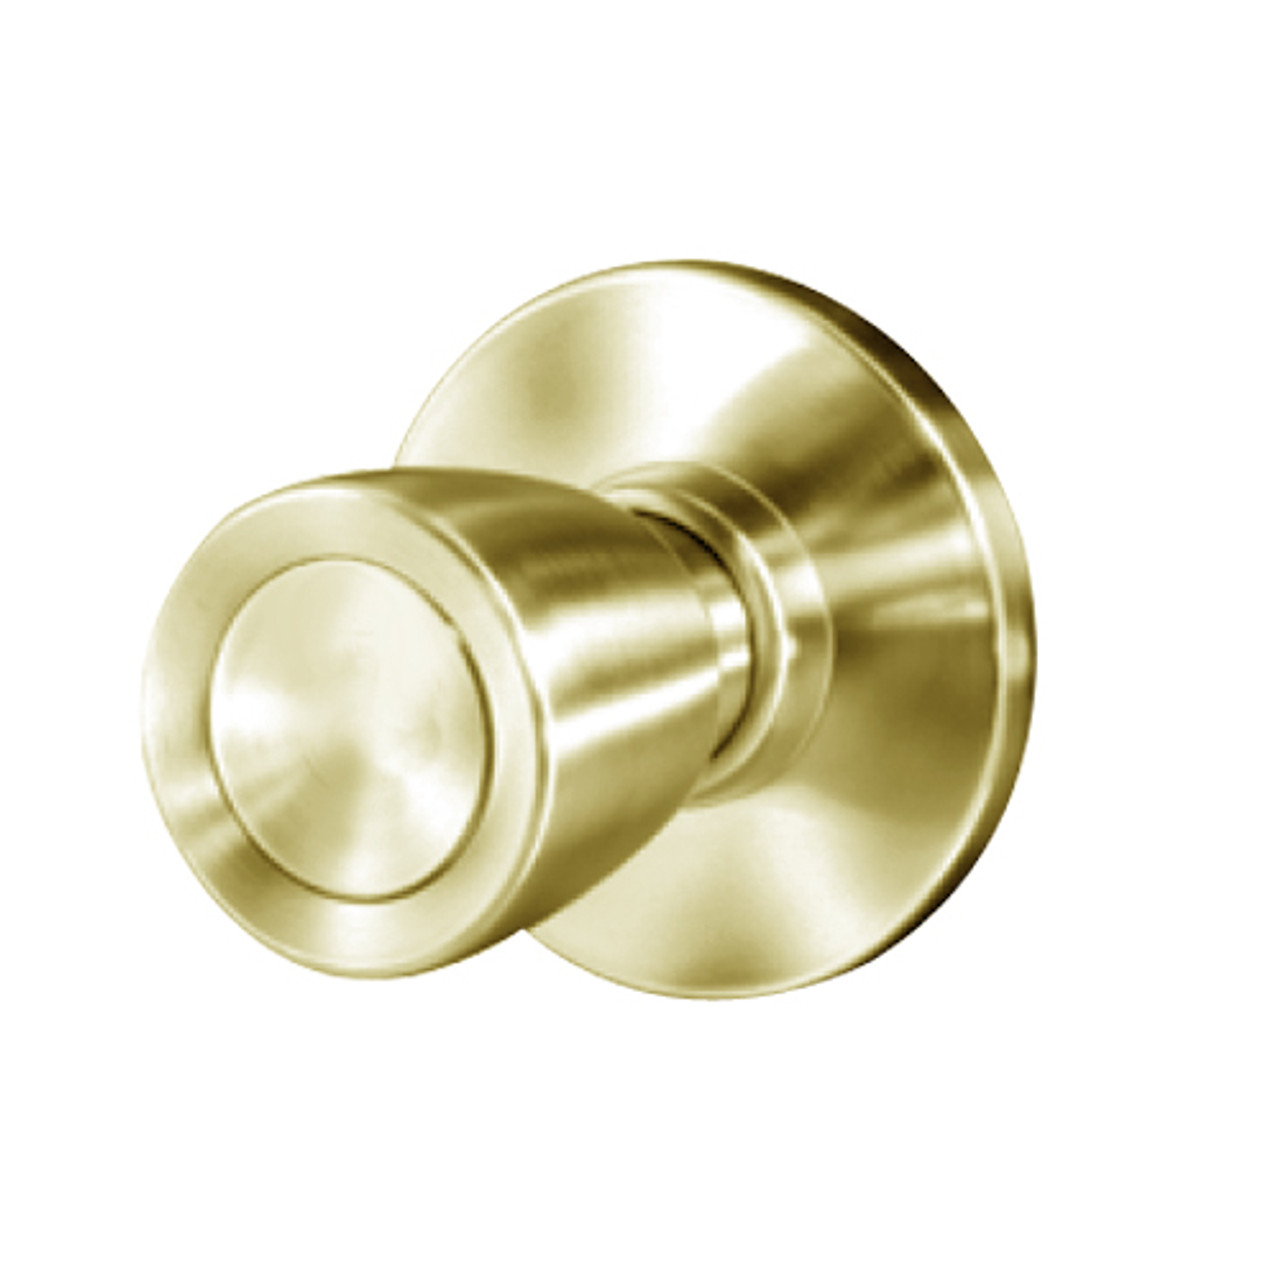 8K30Q6AS3606 Best 8K Series Exit Heavy Duty Cylindrical Knob Locks with Tulip Style in Satin Brass